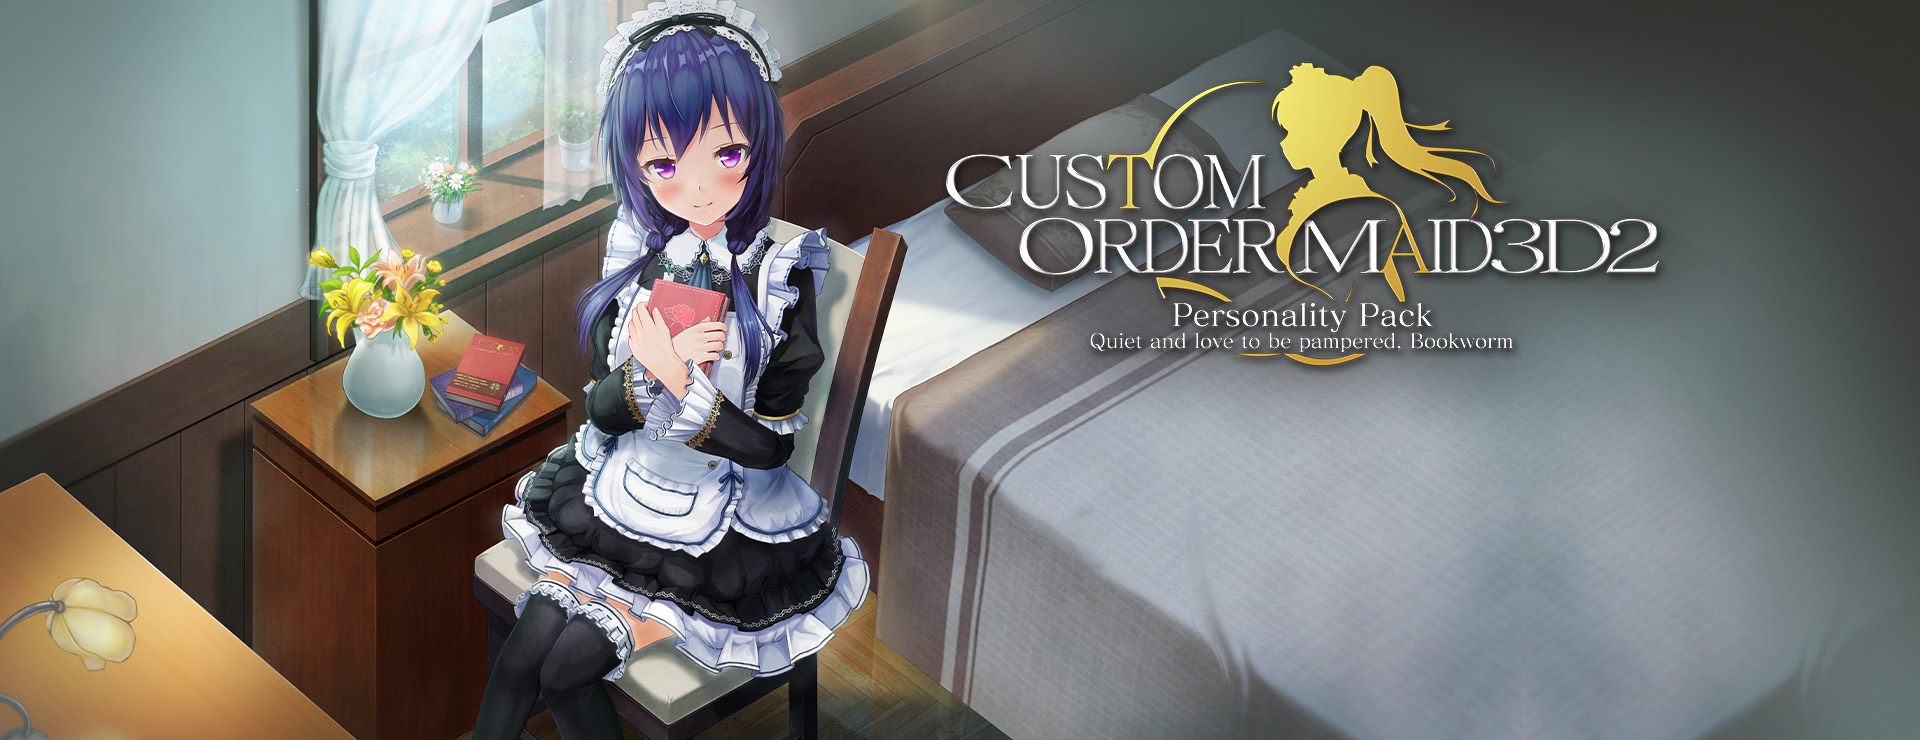 Custom Order Maid 3D2 - Quiet and Love to be Pampered Bookworm DLC - Simulation Game